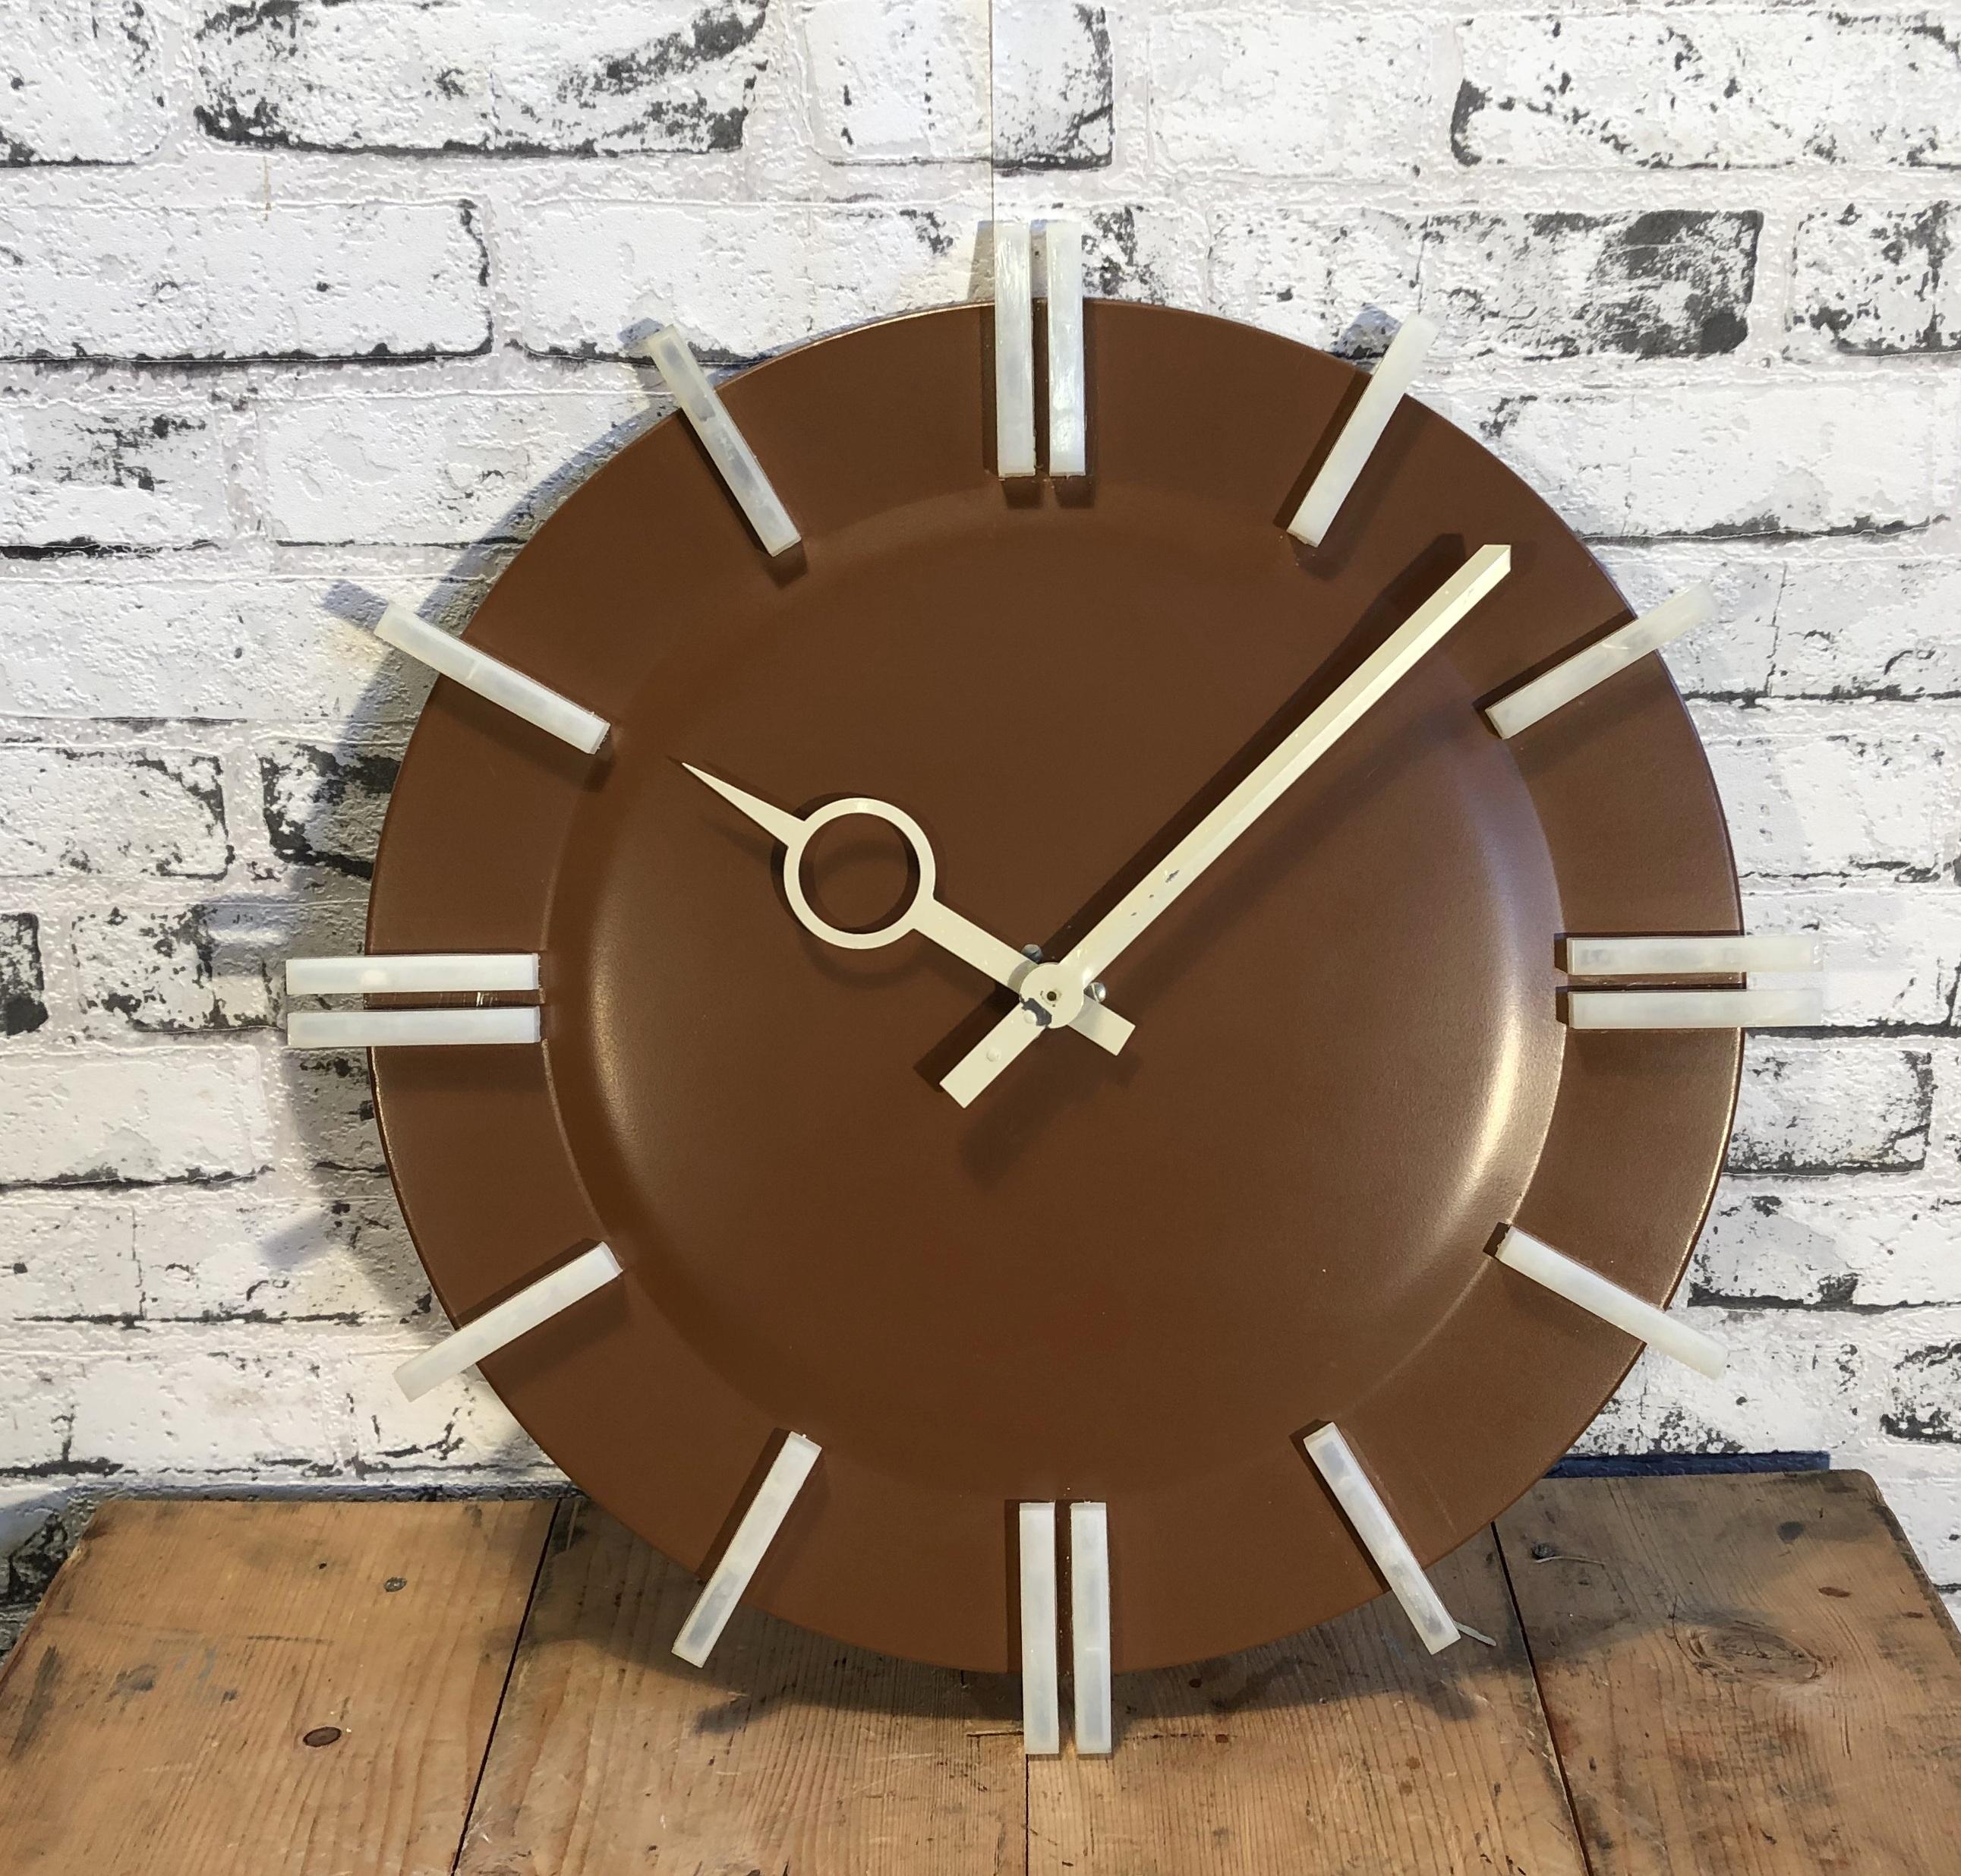 - Pragotron PPH 413 is a type of indoor secondary clock
- Was produced during the 1970s in former Czechoslovakia.
- Brown clock face with white plastic numerals is made from aluminum
- Diameter is 43 cm
- Has been converted into a